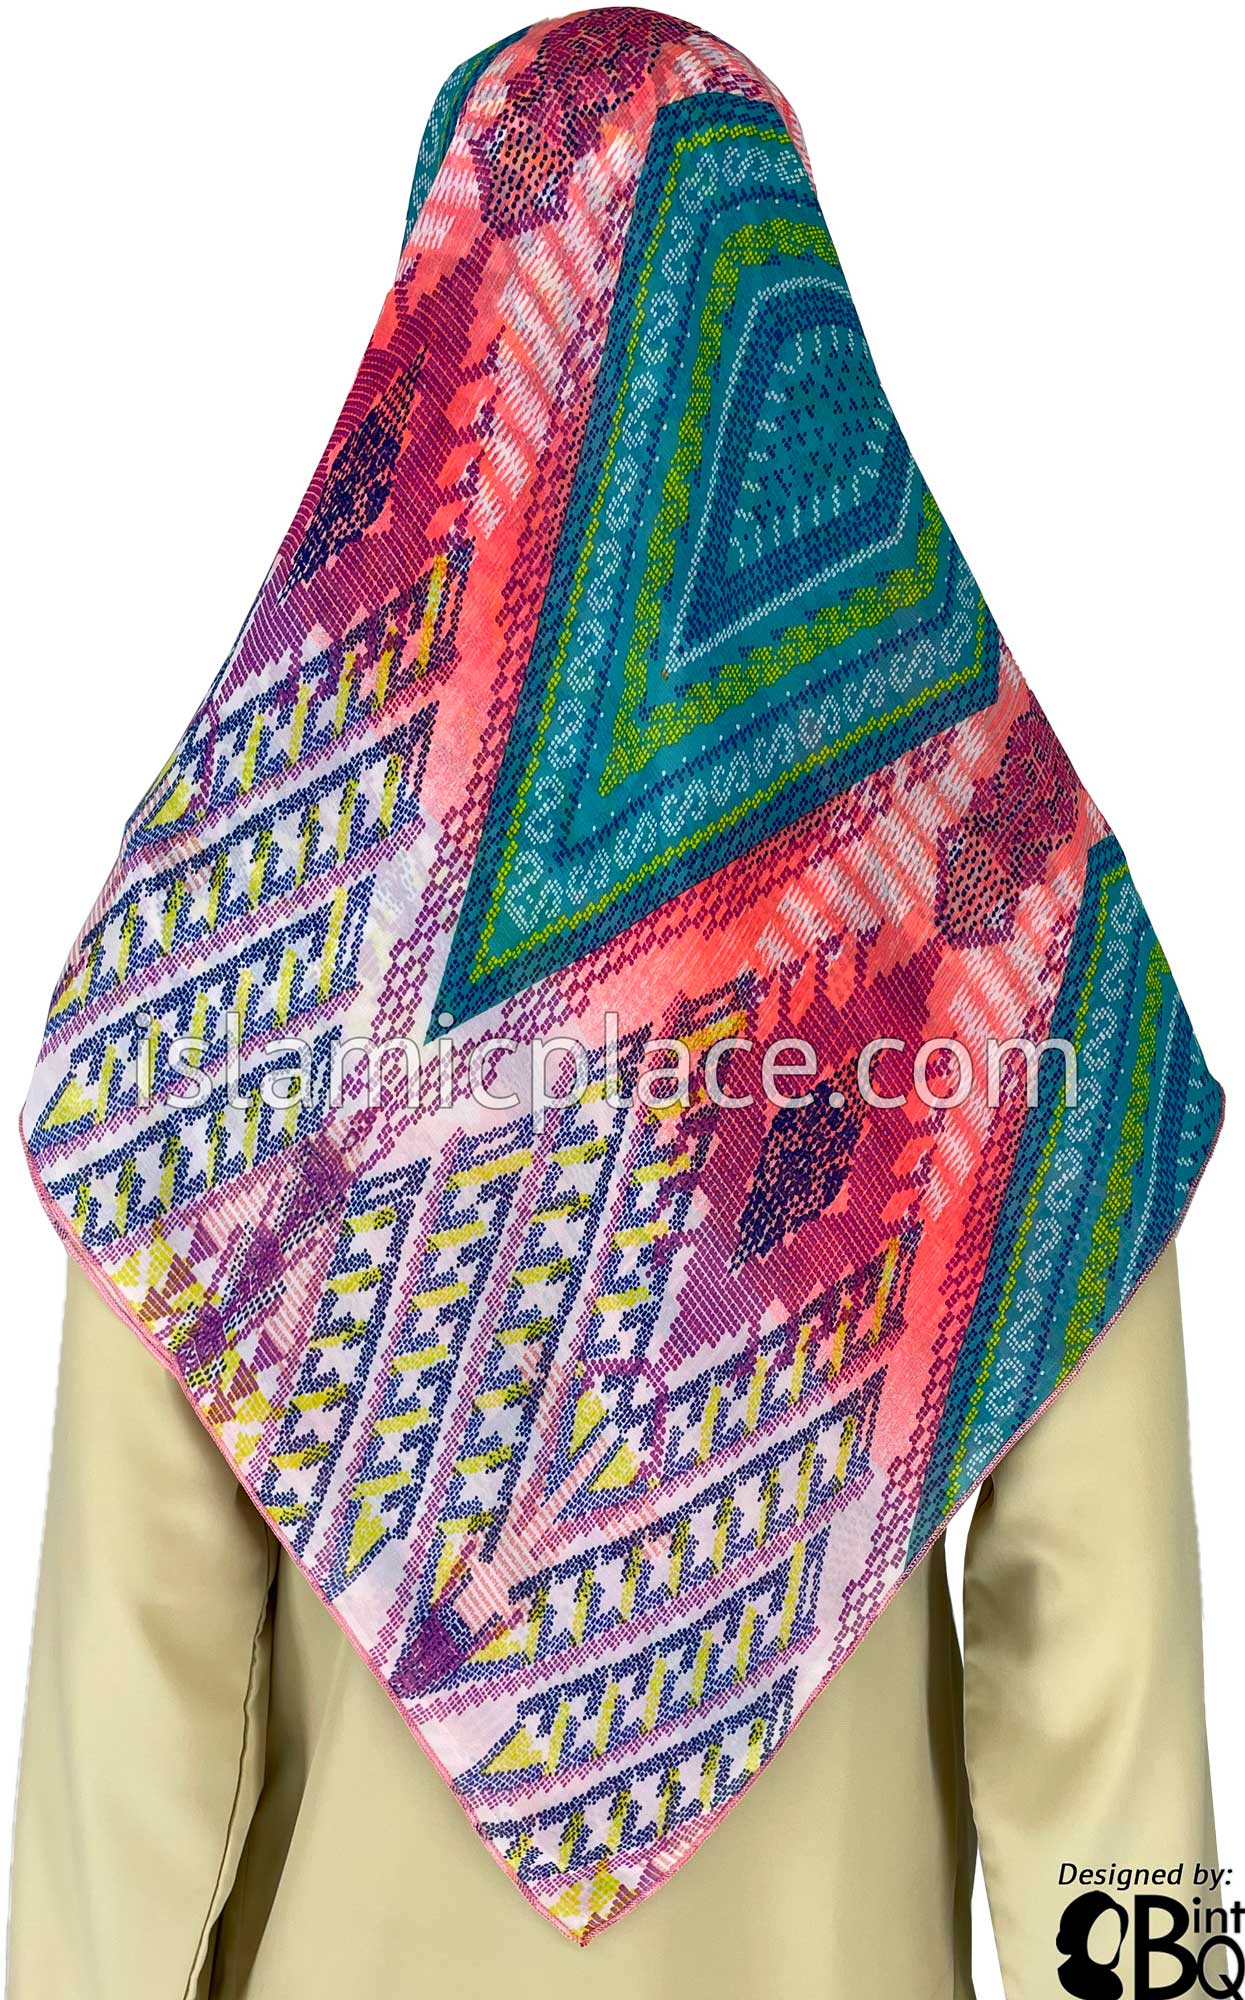 Plum, Coral, Navy, Yellow and Turquoise on White Dotted Diamond Shape Design - 45" Square Printed Khimar